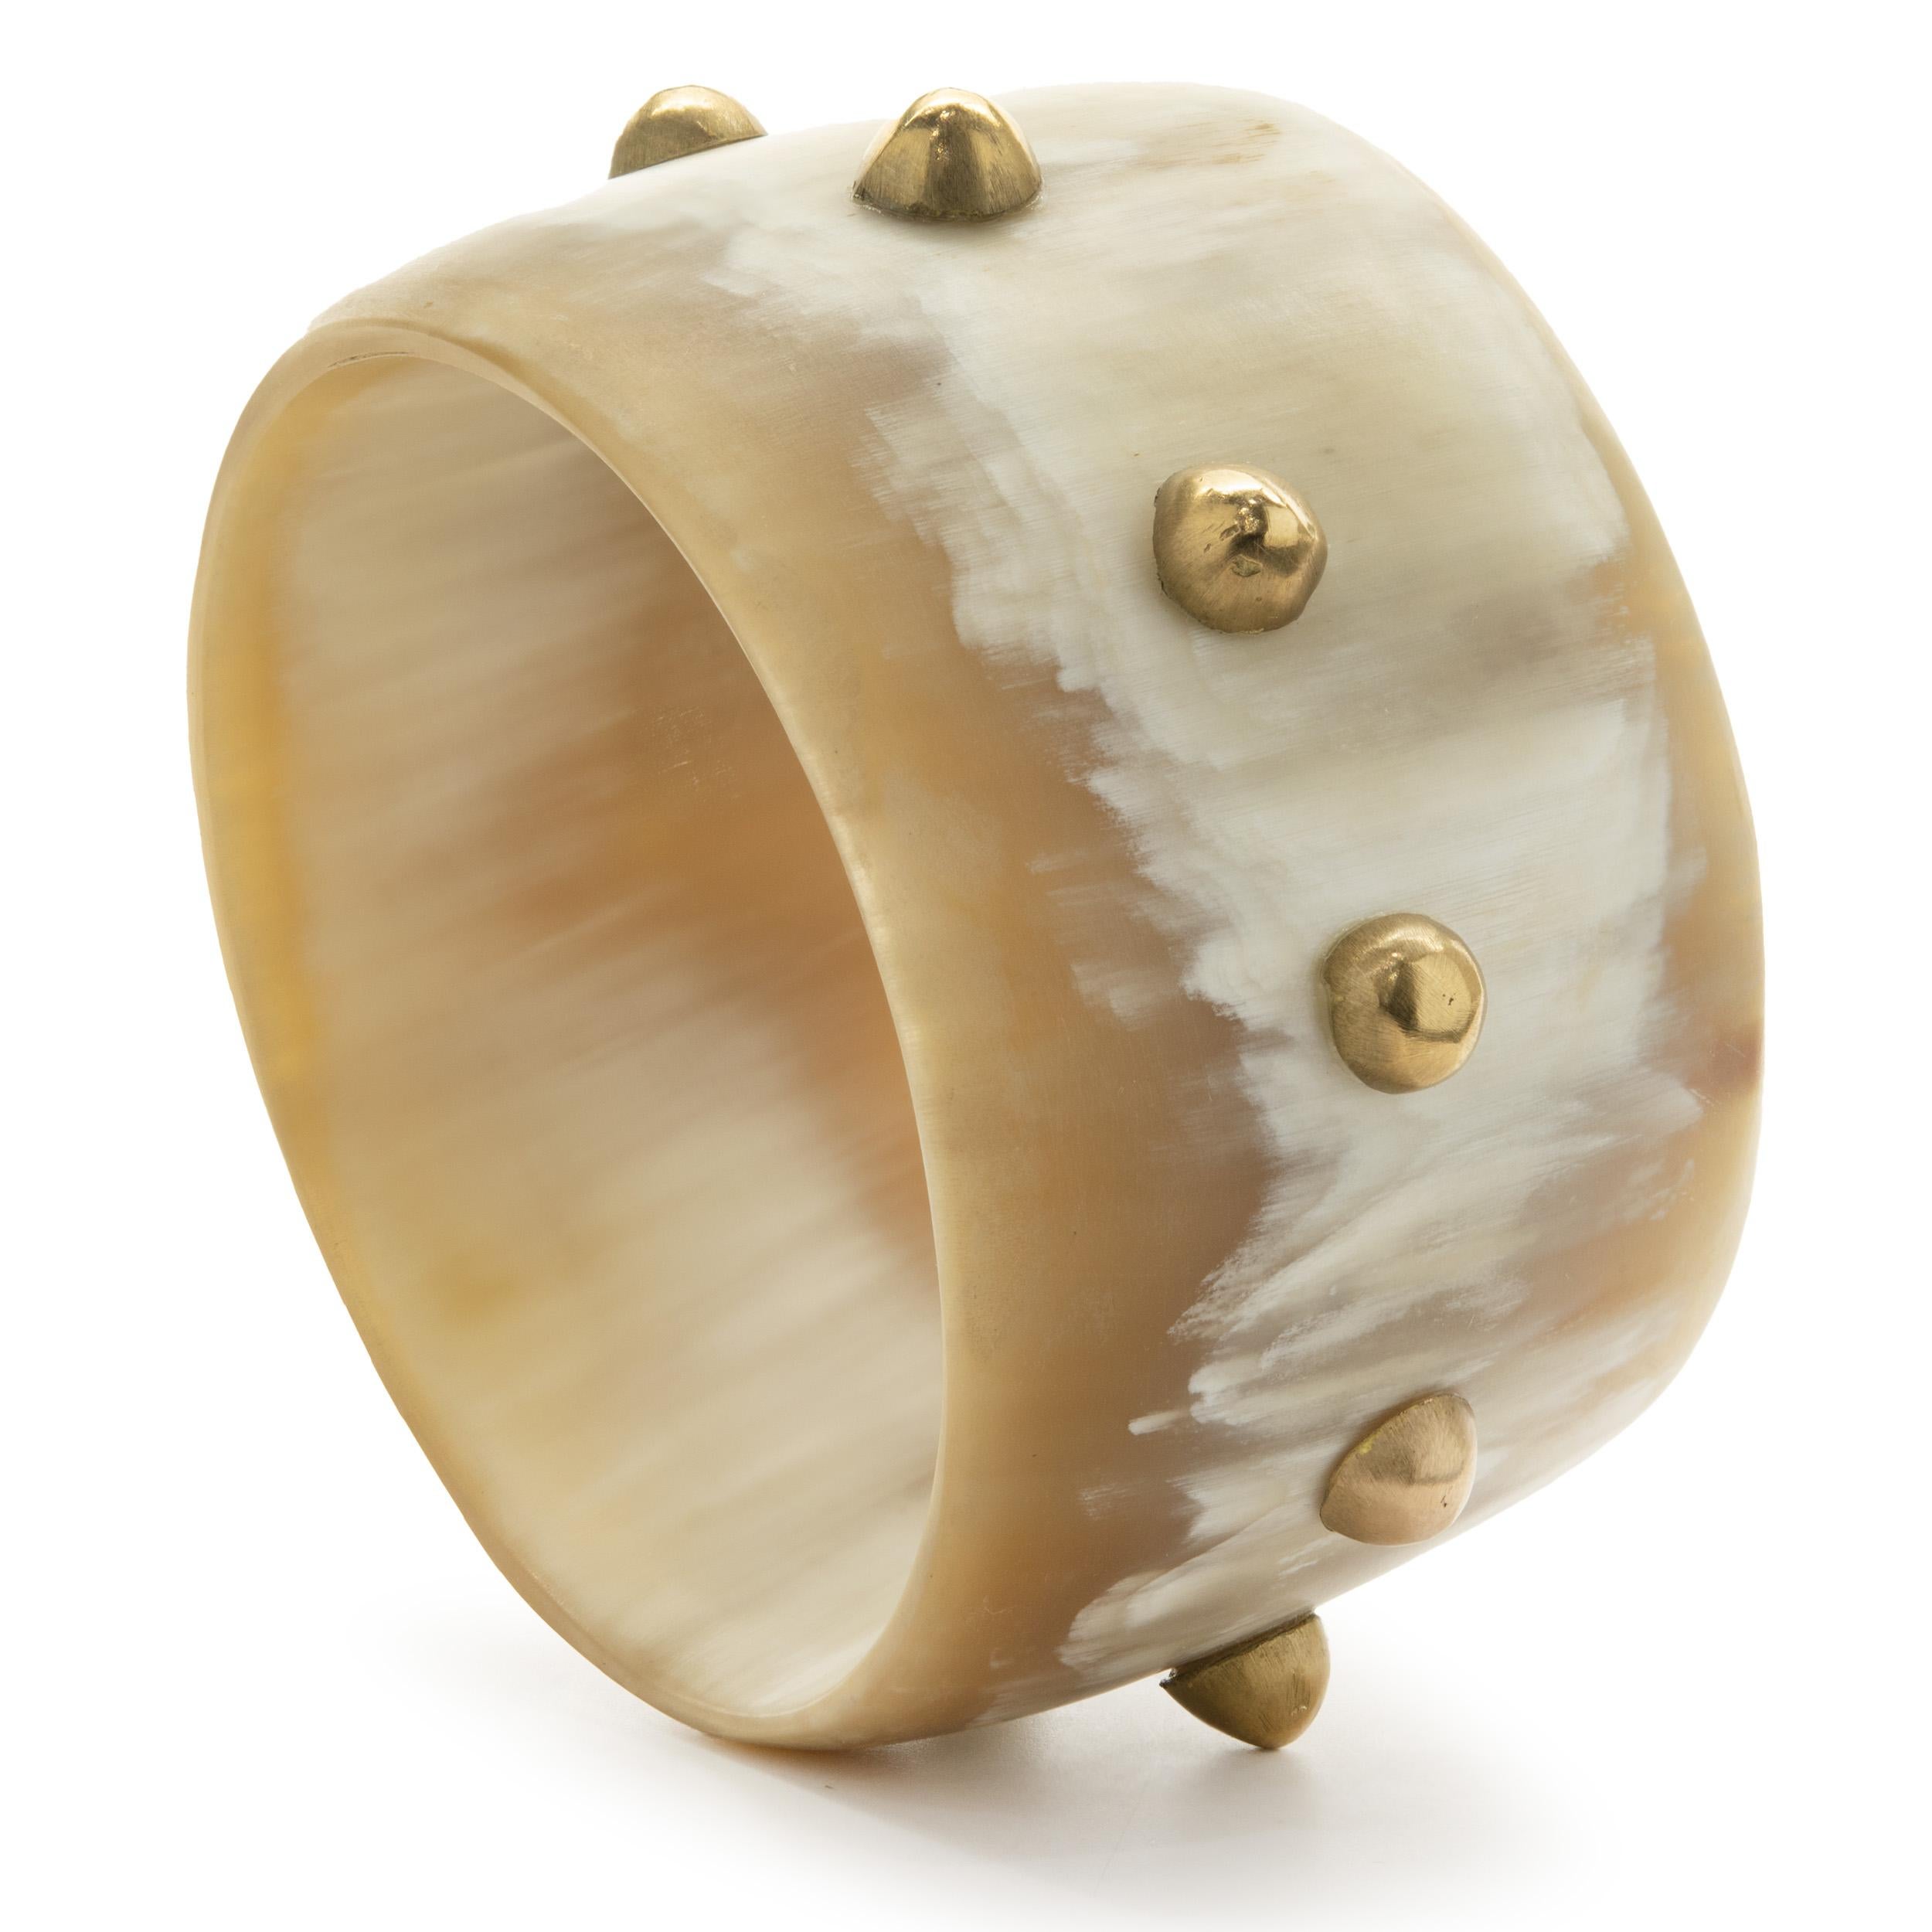 Cream Acrylic Spike Cuff Bracelet In Excellent Condition For Sale In Scottsdale, AZ